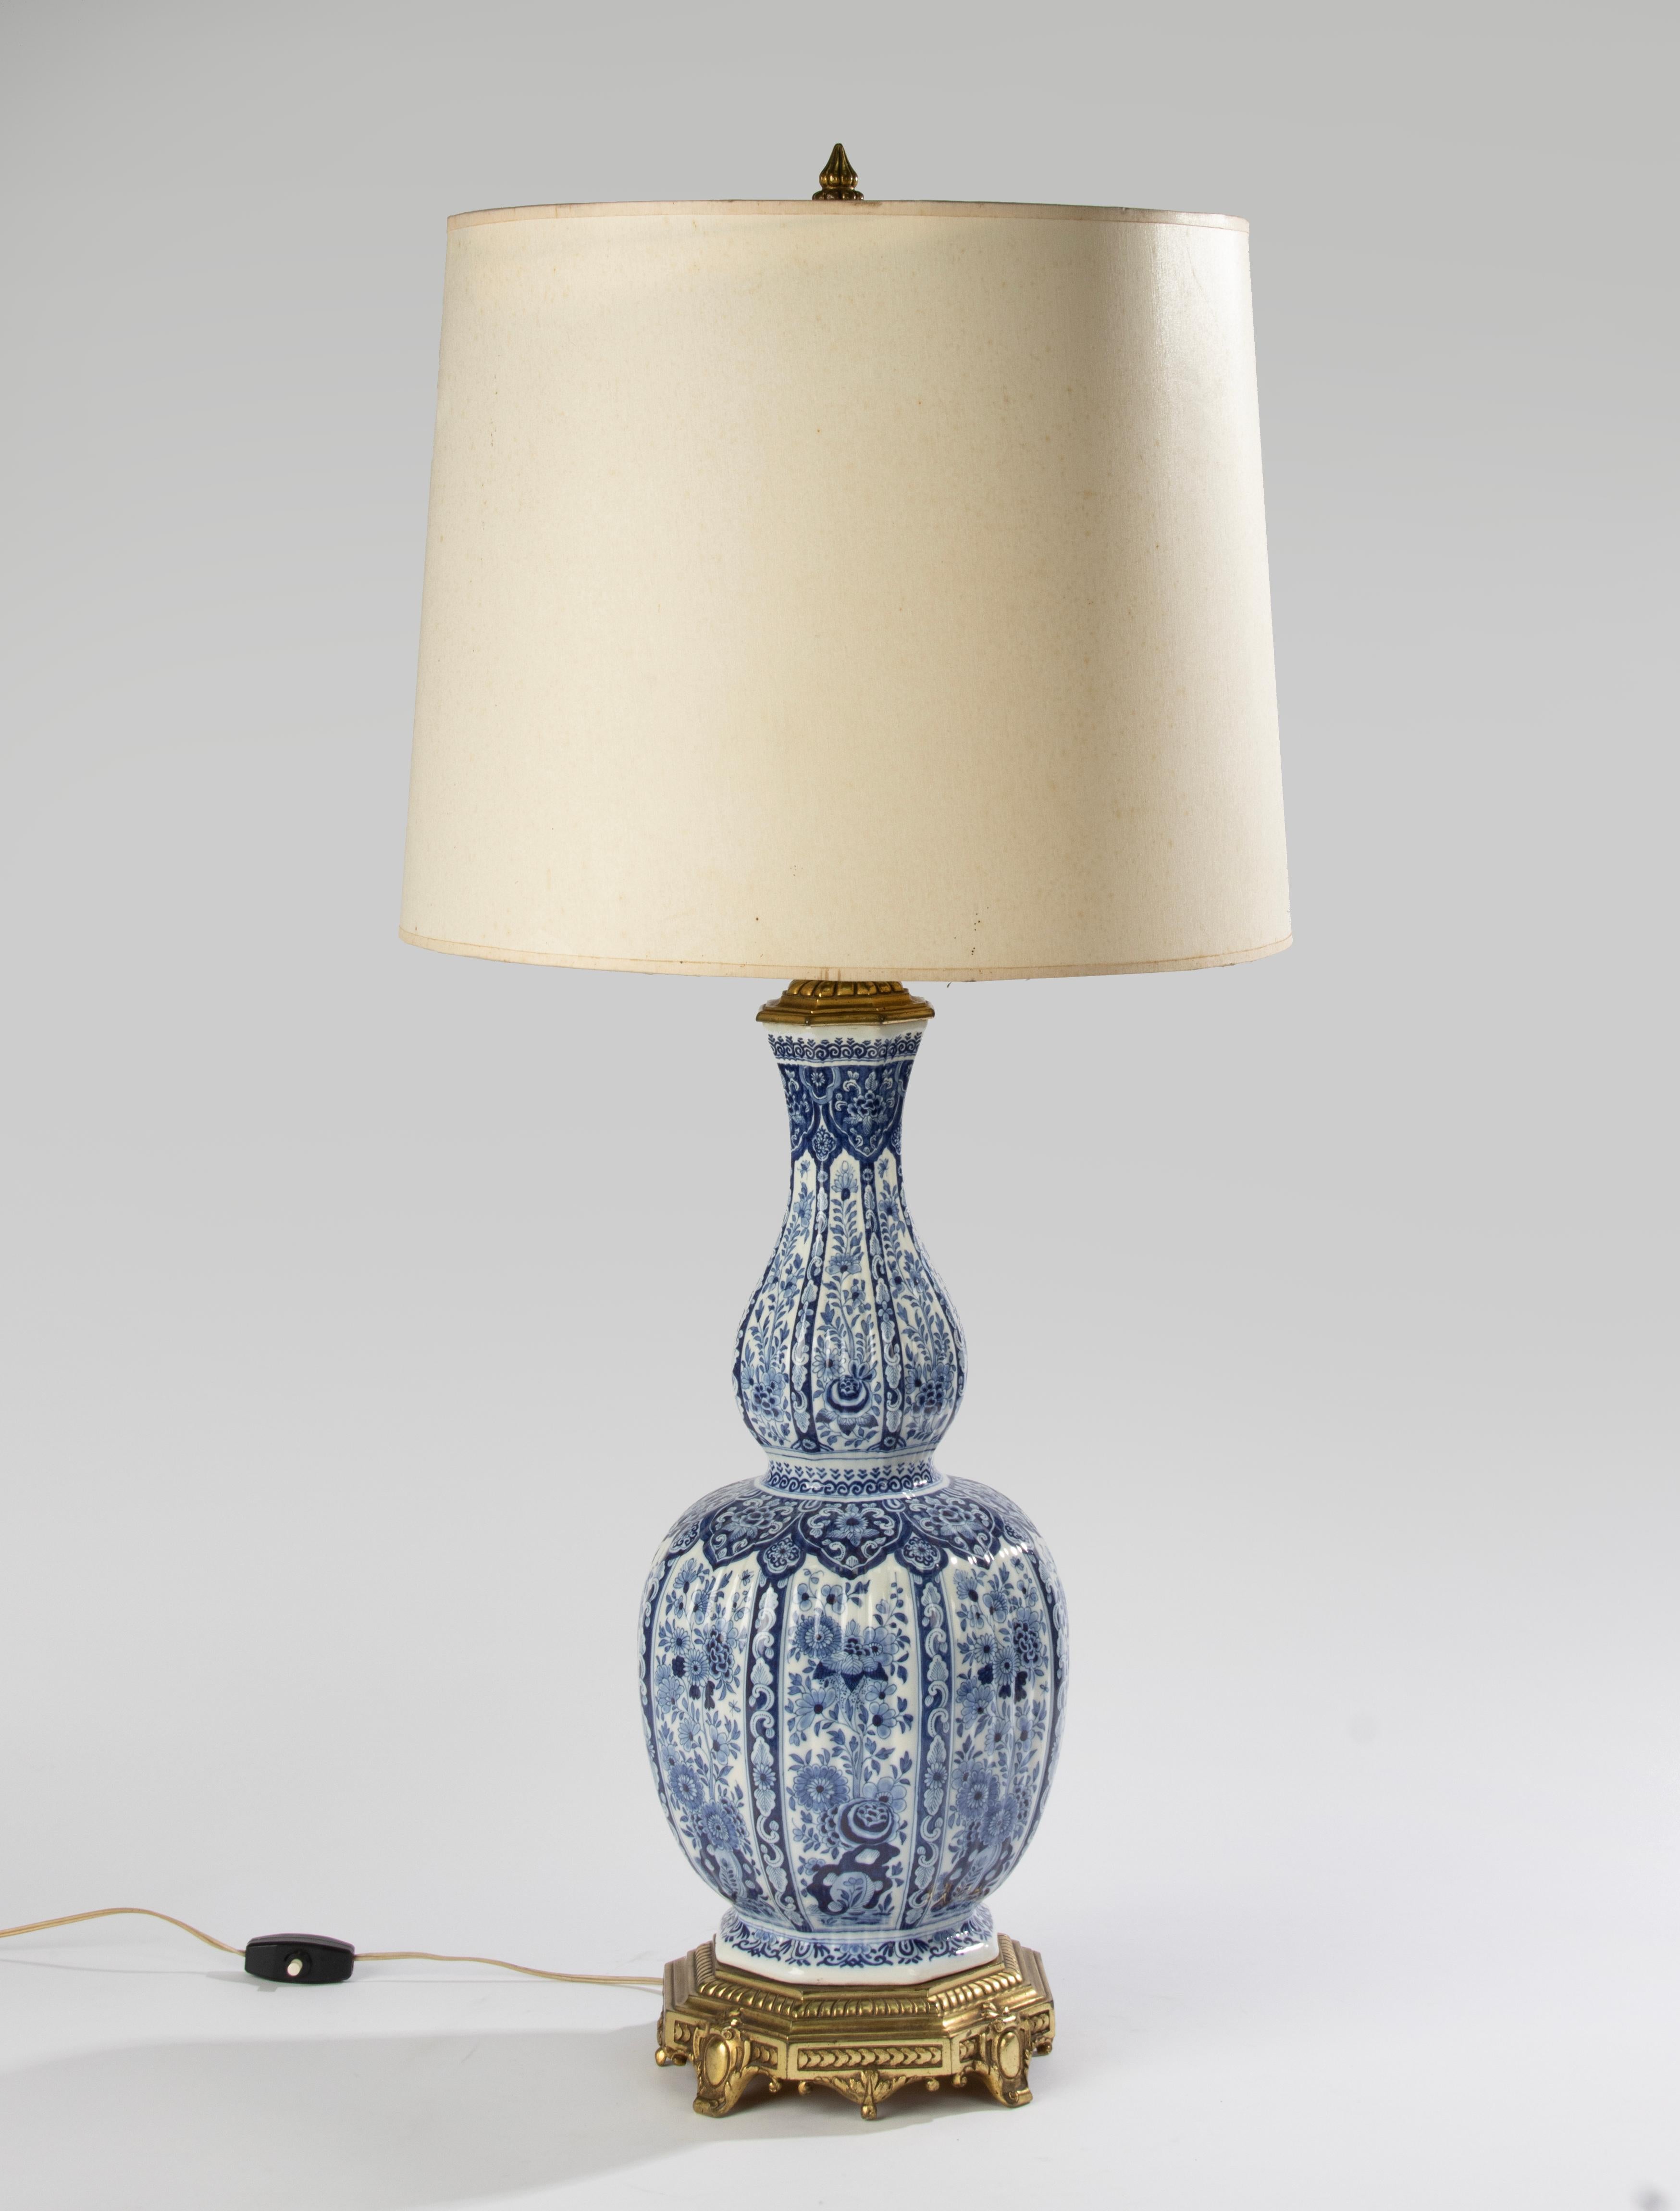 A beautiful antique ceramic Delft vase, which was later changed into a table lamp, in the 1960s. The ceramic Delft vase dates from circa 1880. It is marked on the bottom. The ceramic is hand-painted with beautiful shades of blue. Channeled ceramic,